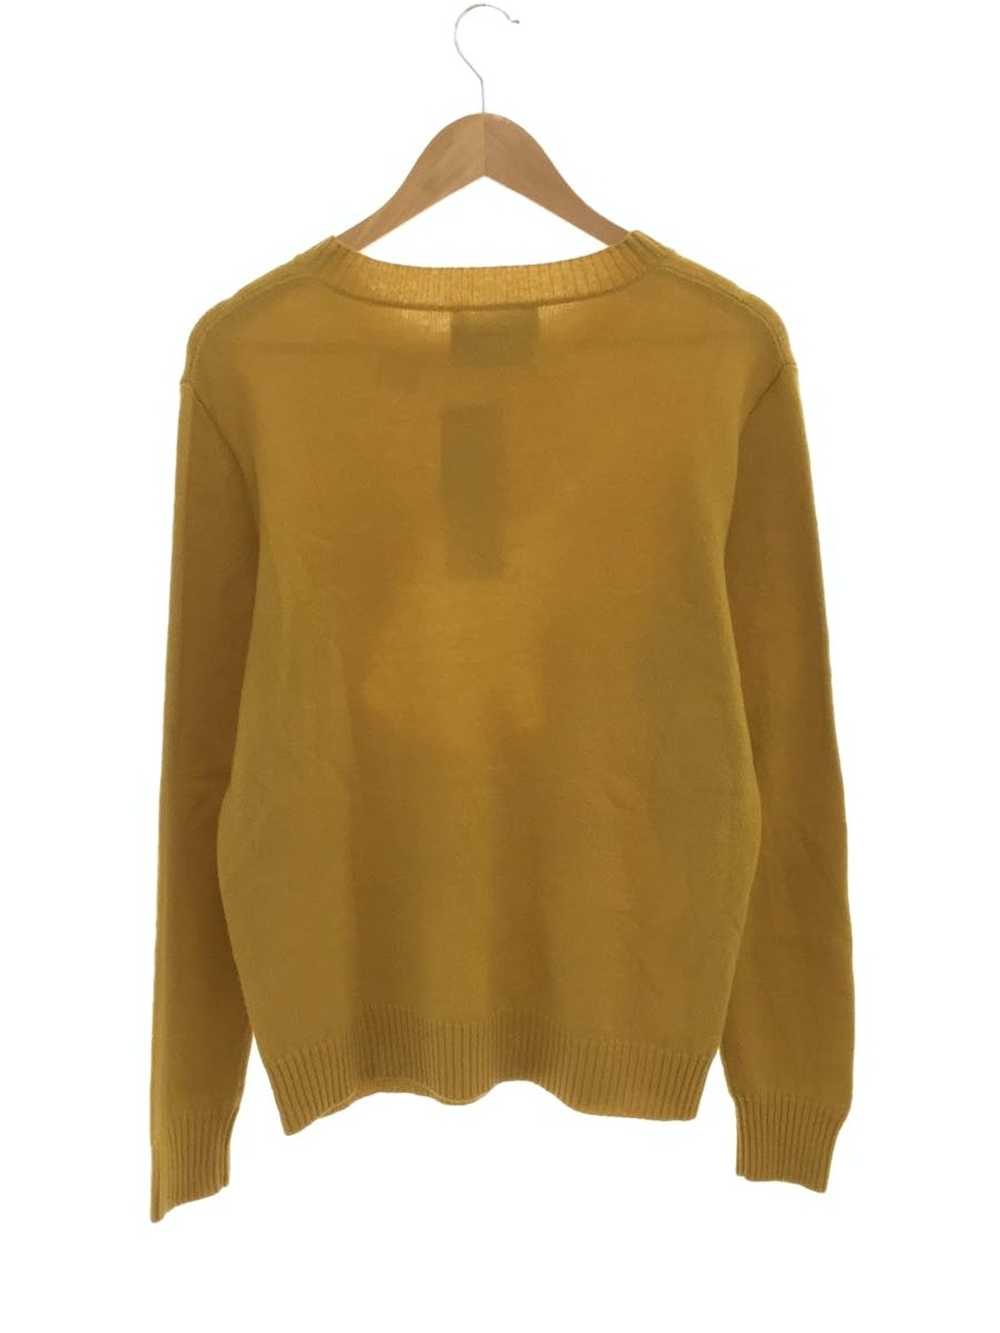 Undercover Sweater Yellow Knit Design Wool Long S… - image 2